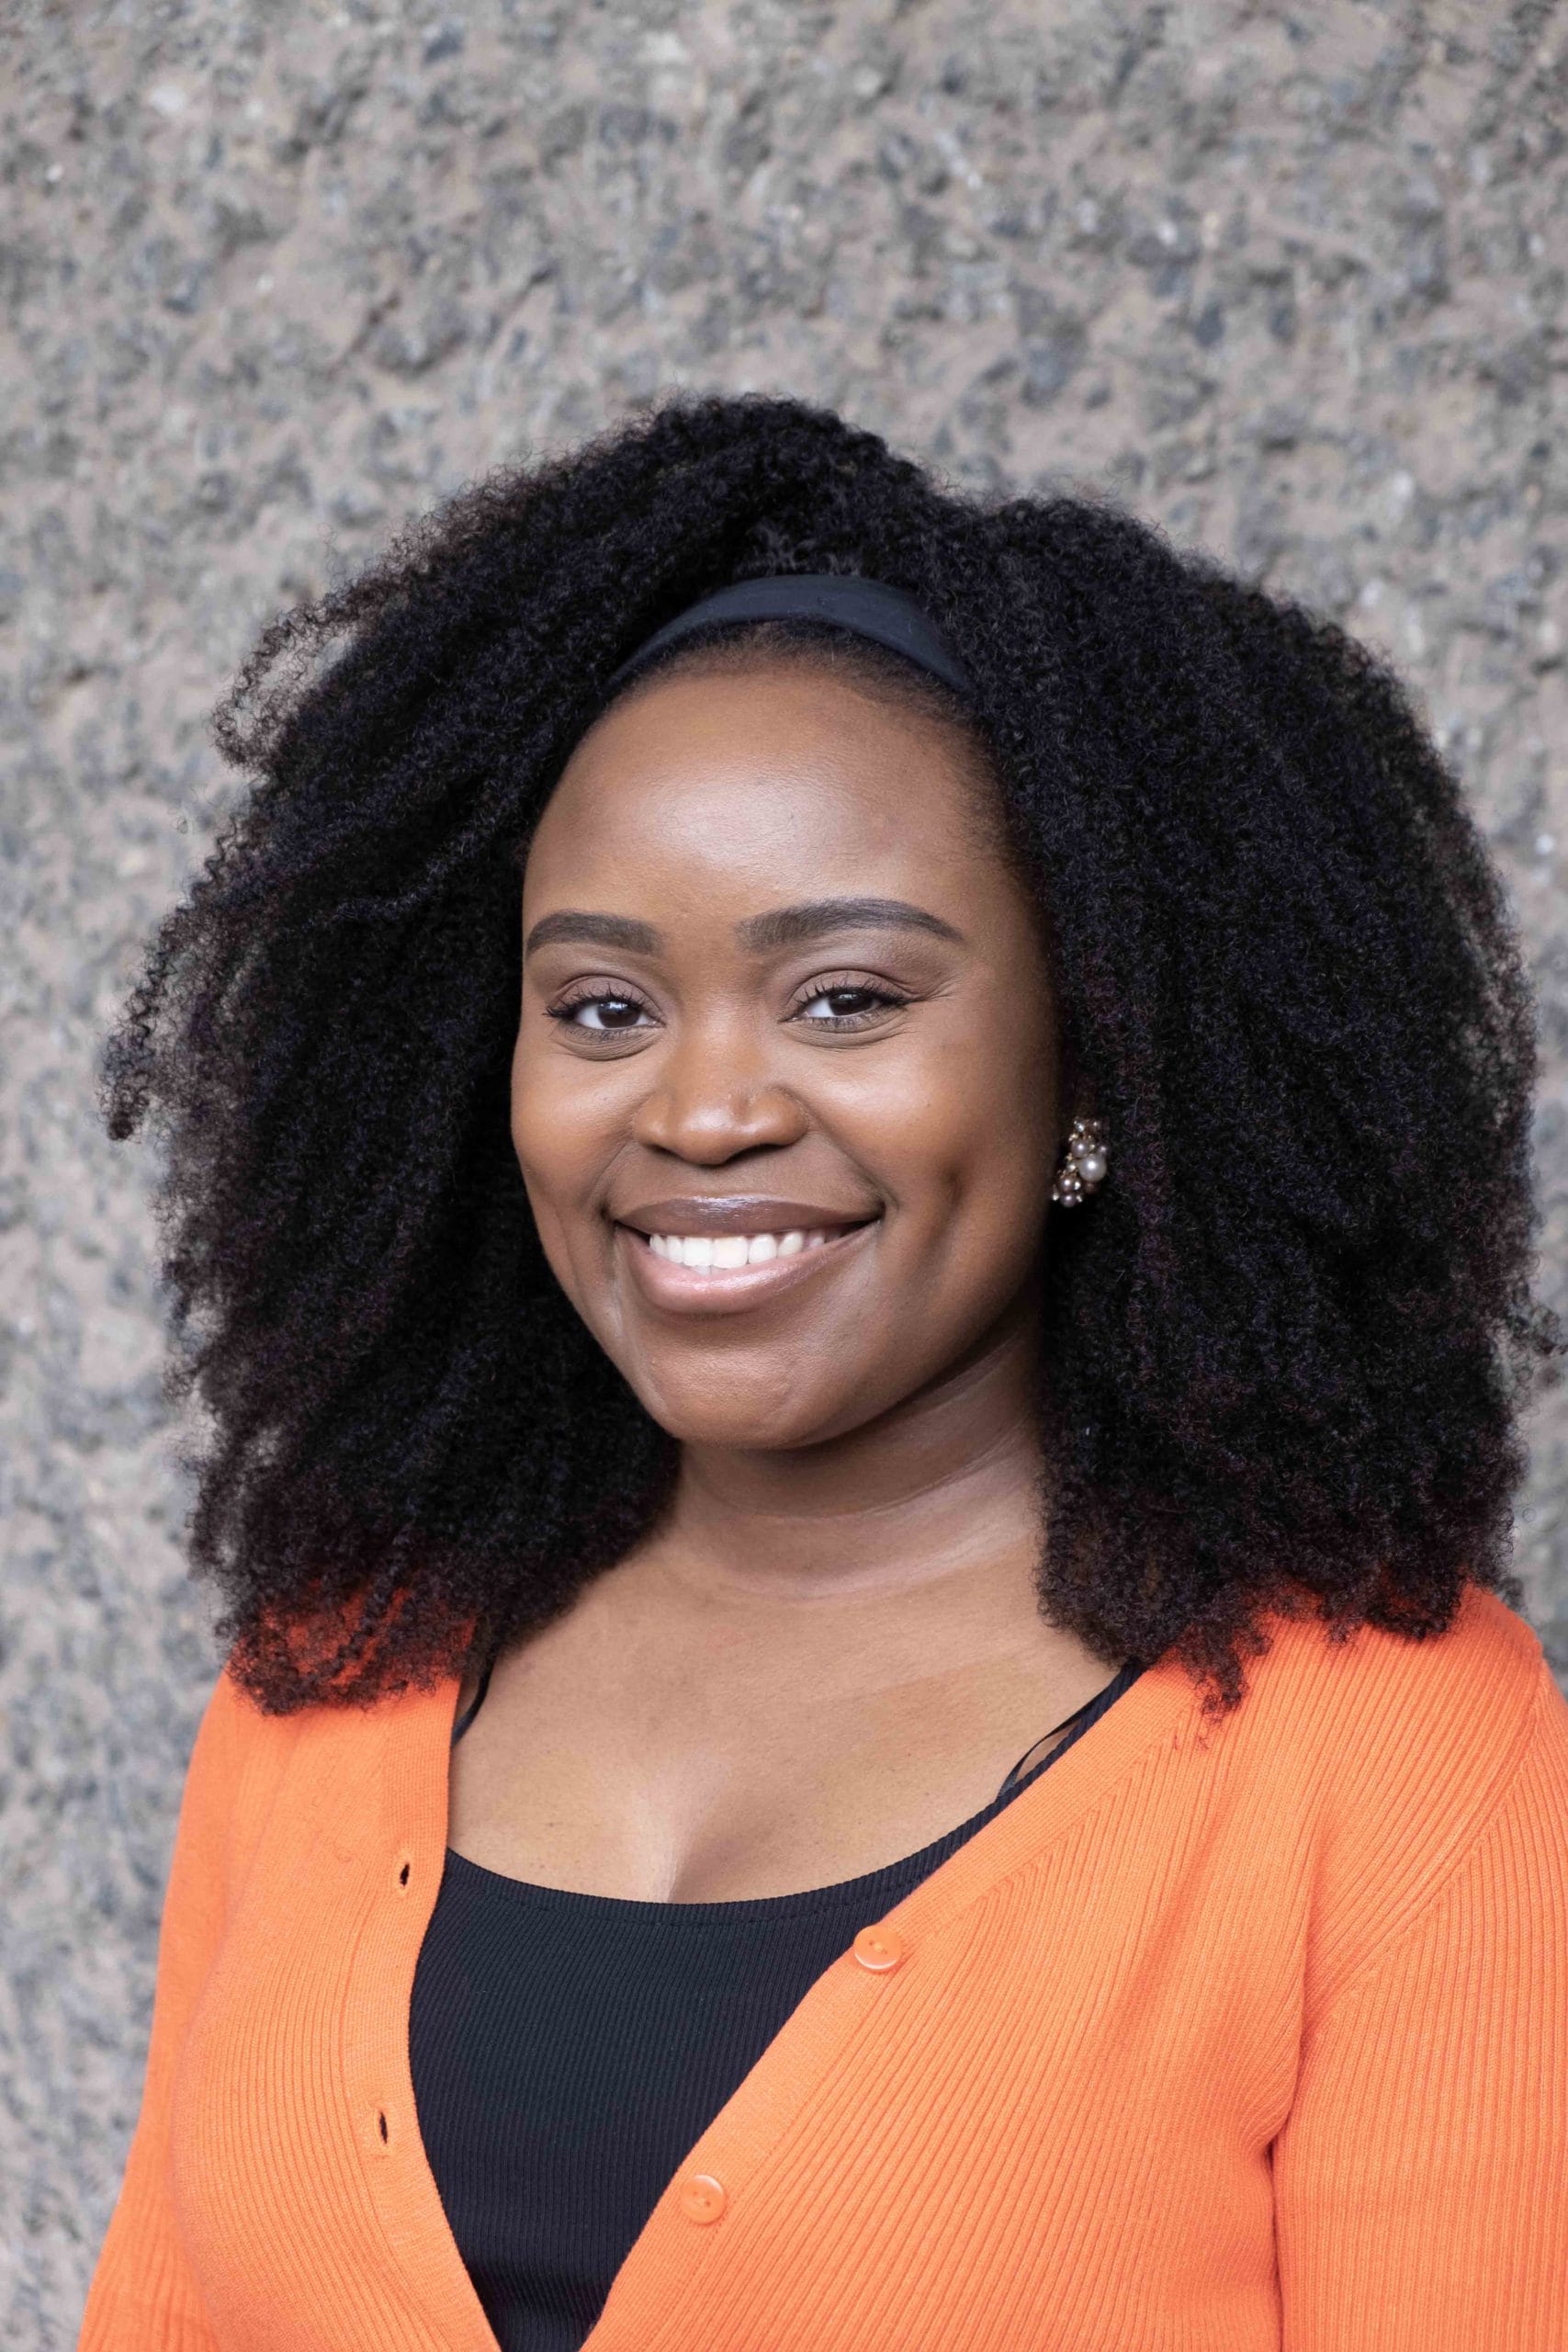 Mwansa Phiri's headshot. Mwansa is smiling and looking directly into the camera. She is a black woman with dark brown shoulder length hair and she is wearing a bright orange cardigan. Behind her is a grey pebbledash wall.